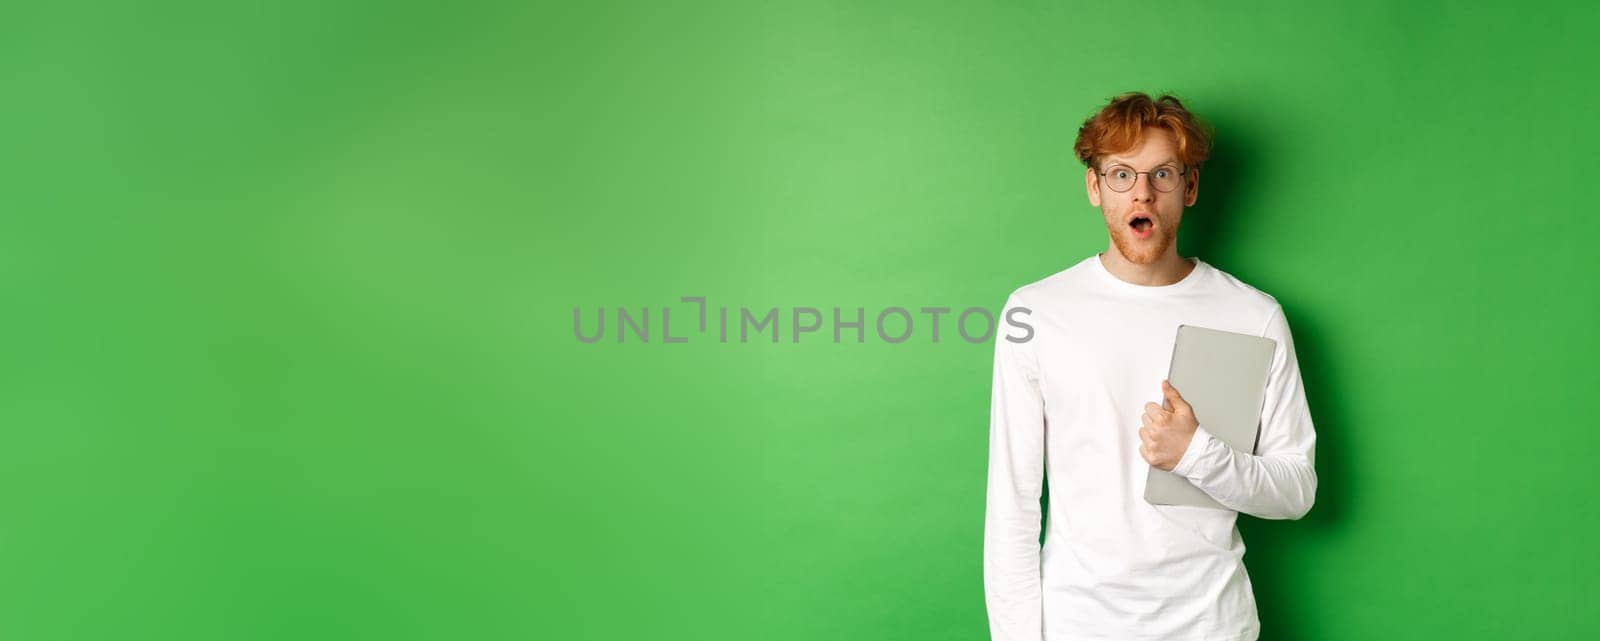 Surprised young man holding laptop and staring at camera, wearing glasses and white t-shirt, standing over green background.